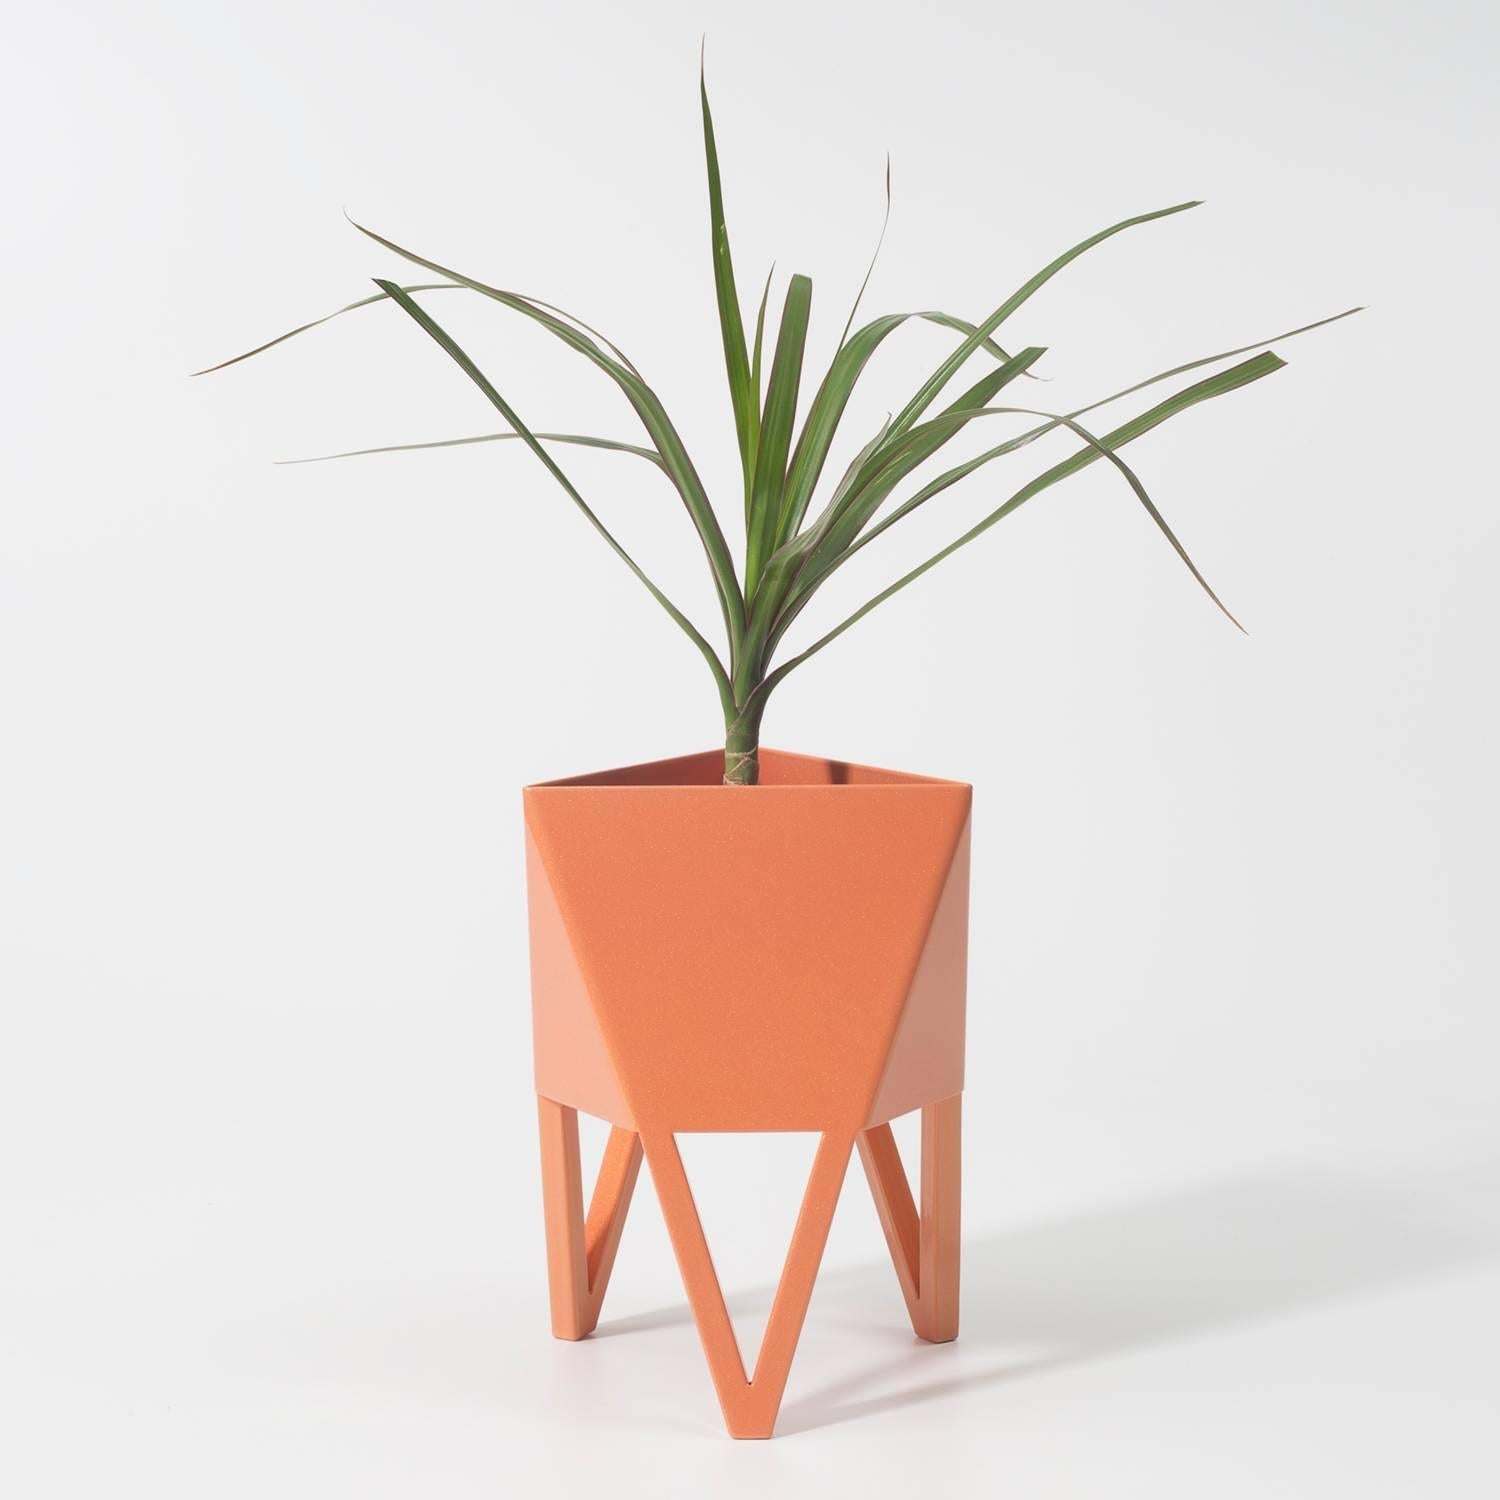 Introducing Force/Collide's signature planter in sunbeam salmon pink. Using a seamless brake-forming technique, one sheet of steel is wrapped into a unique geometric pattern that's triangular at the top and hexagonal at the base. Three V-shaped legs